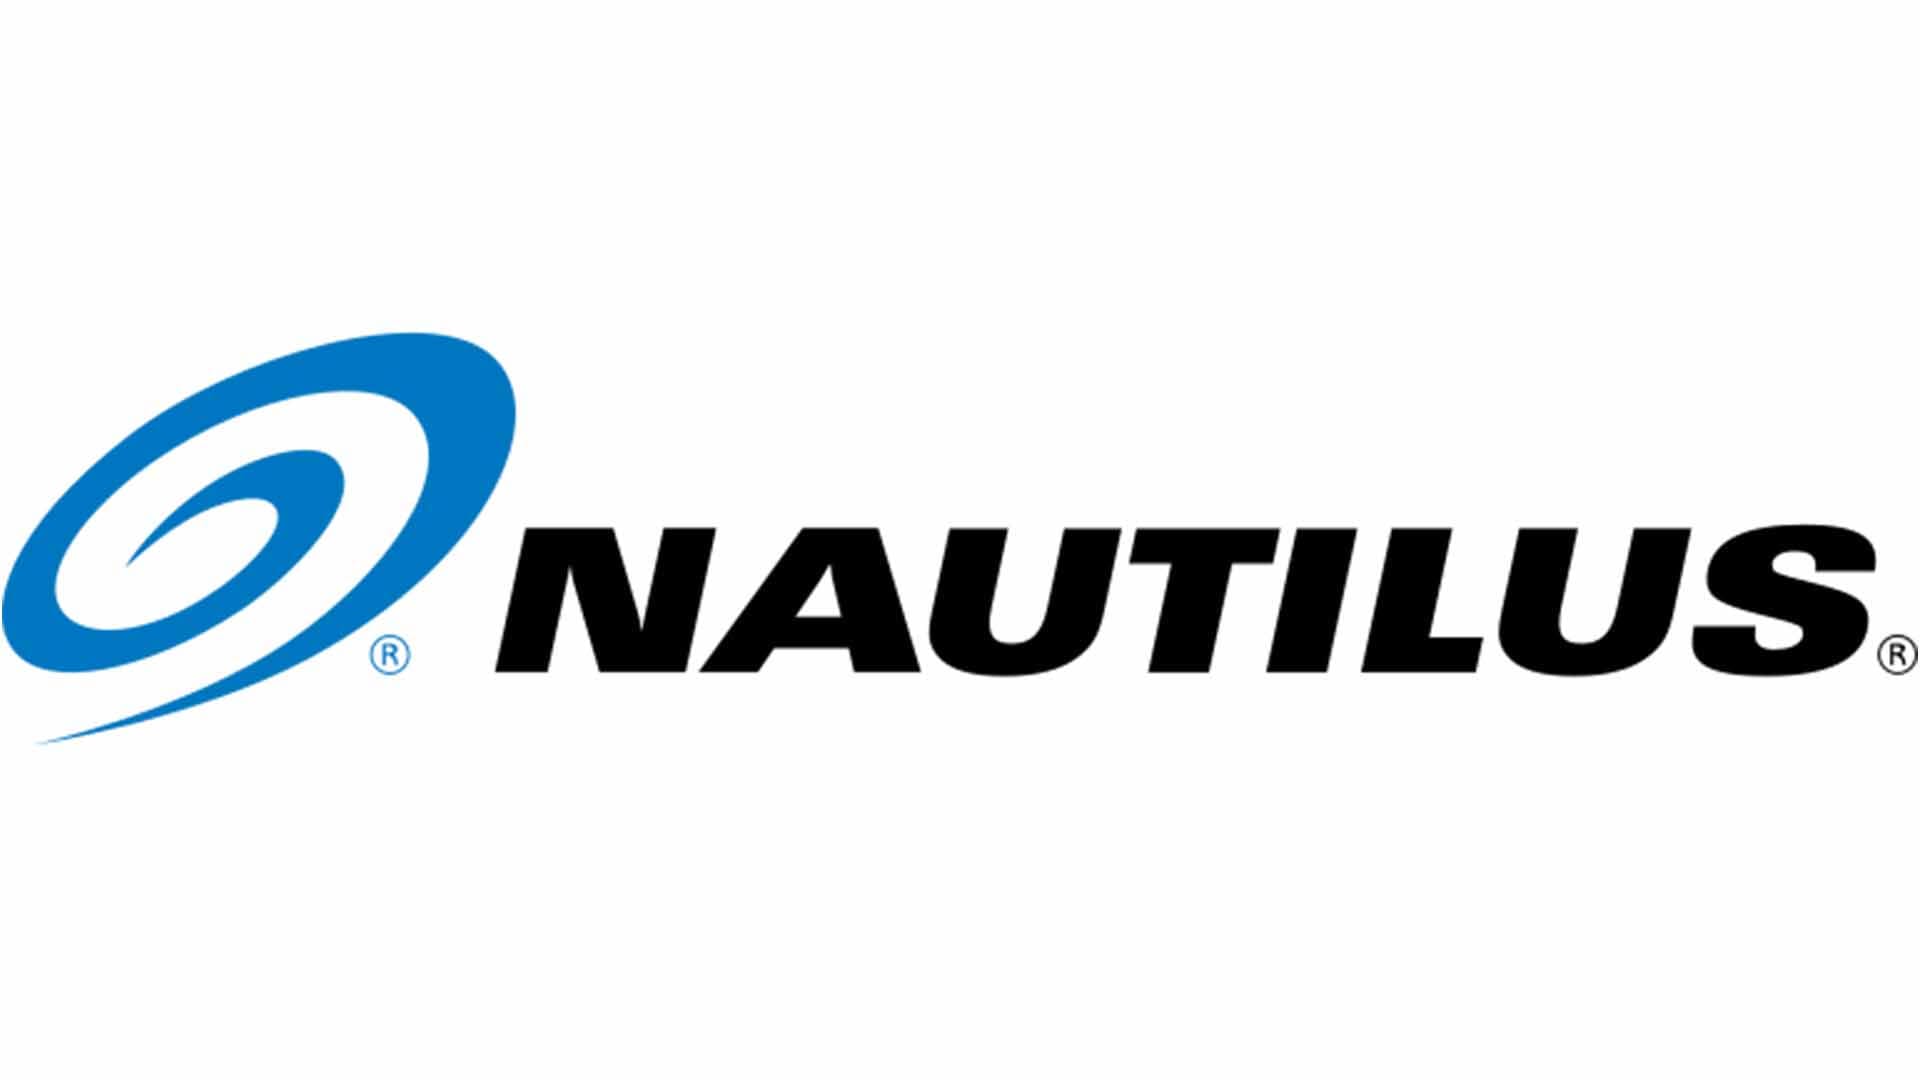 A logo of nautilus is shown.